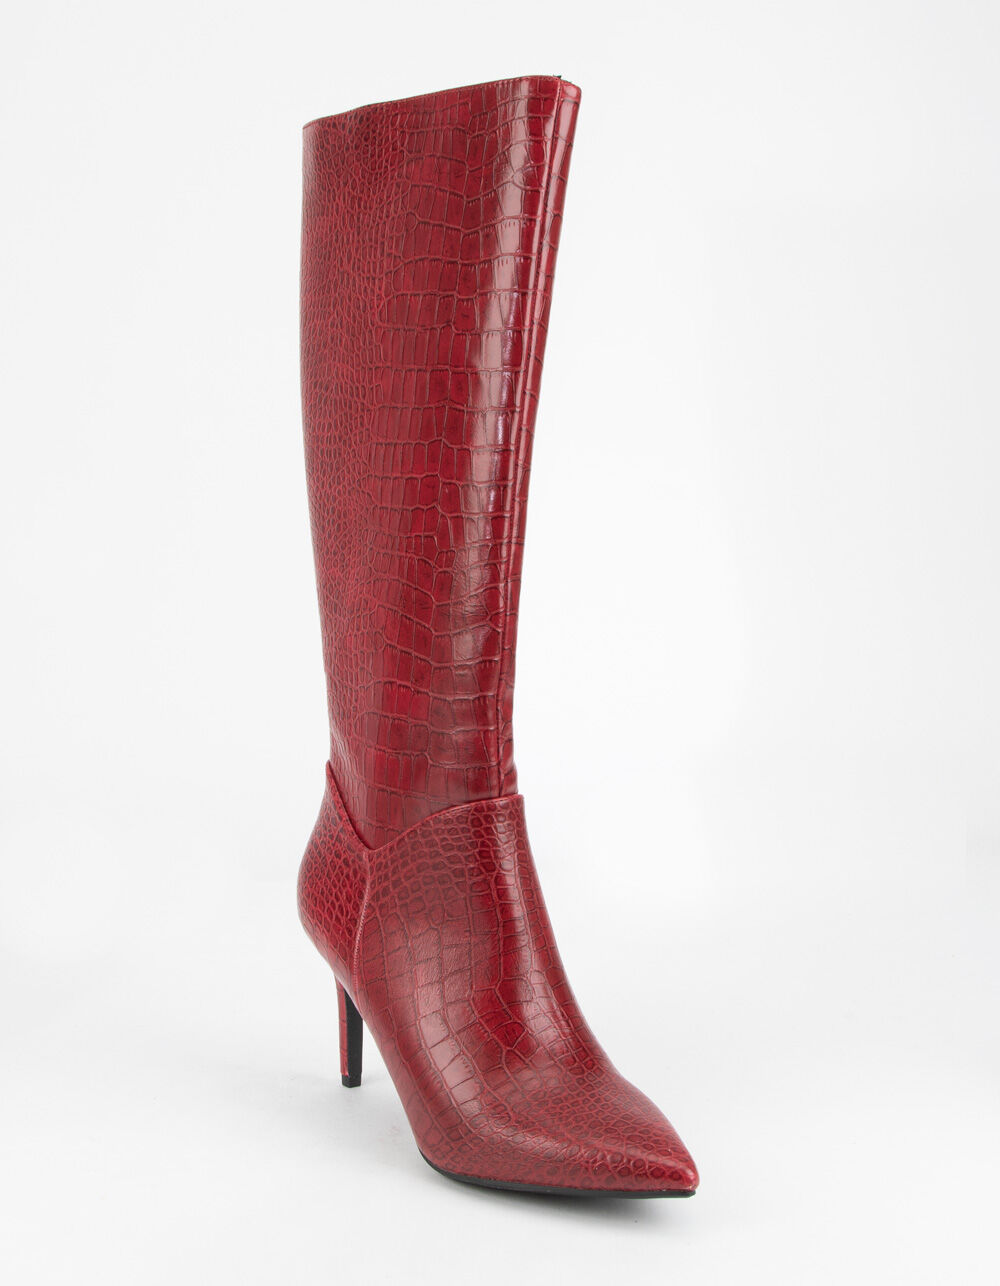 DELICIOUS Crocodile Knee High Red Womens Boots